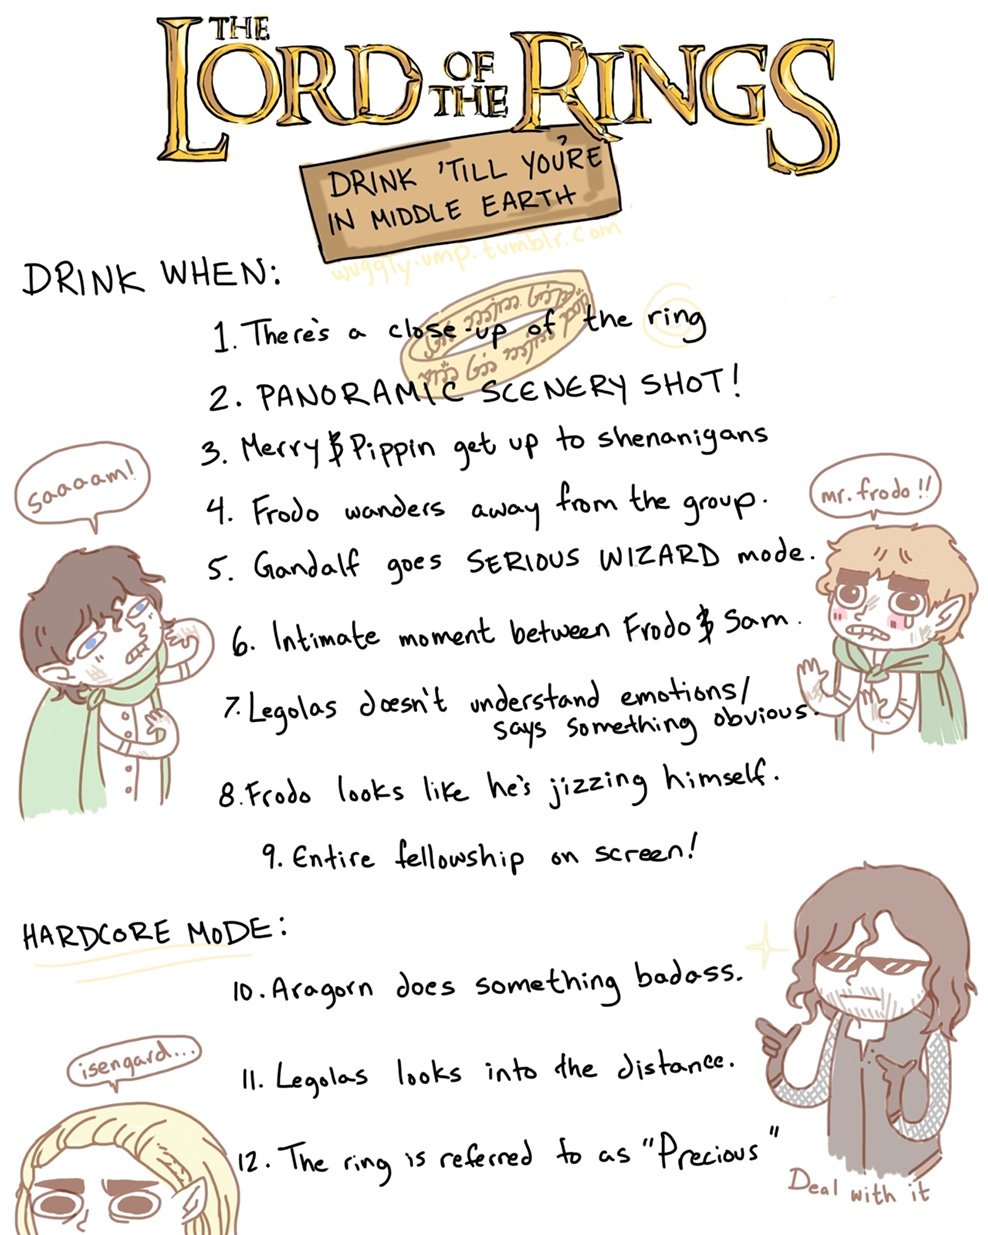 The Lord of the Rings drinking game.